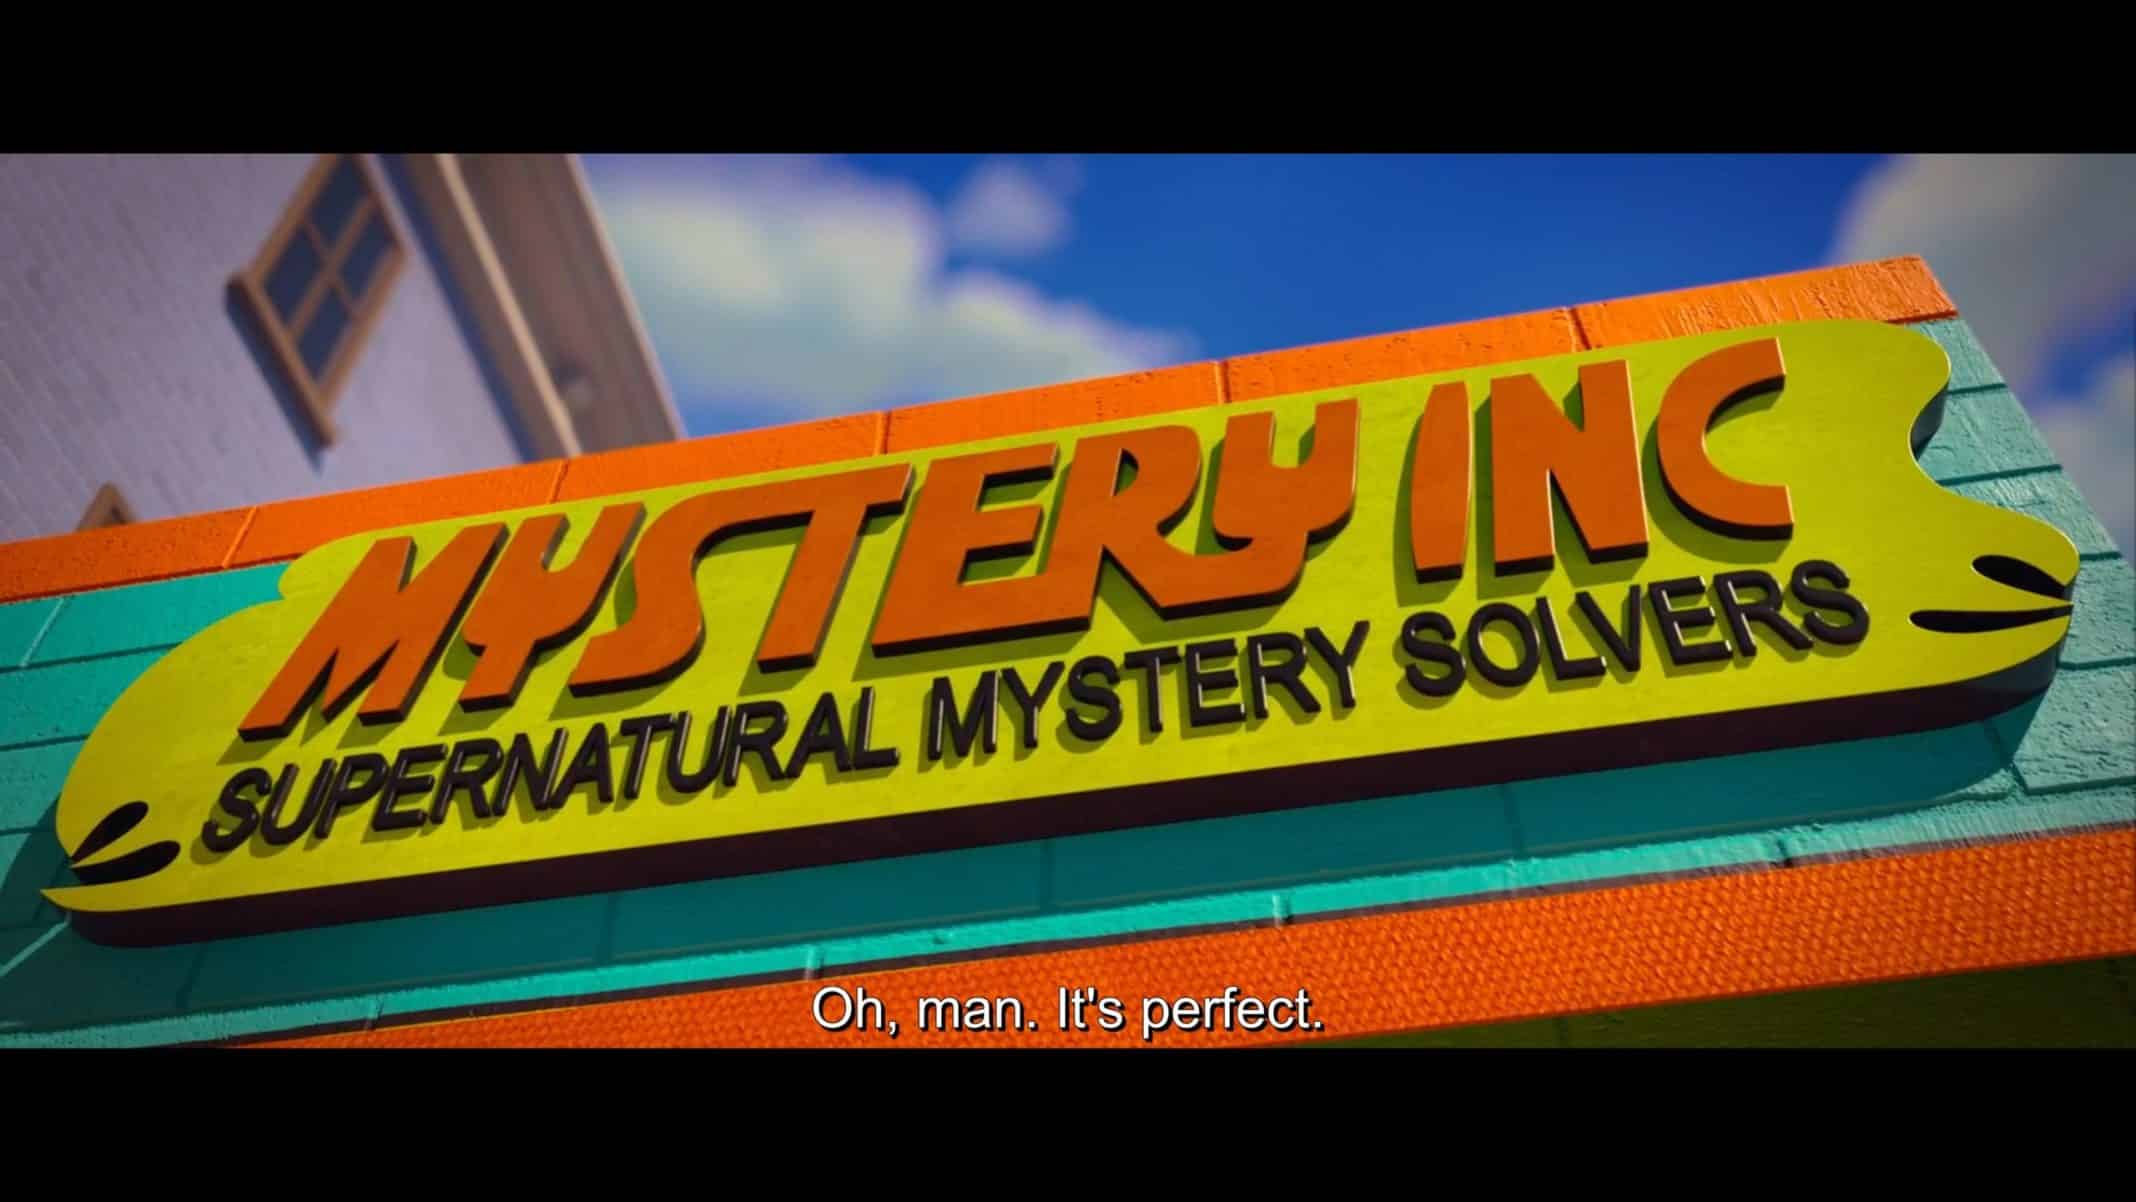 The Mystery Inc., storefront.